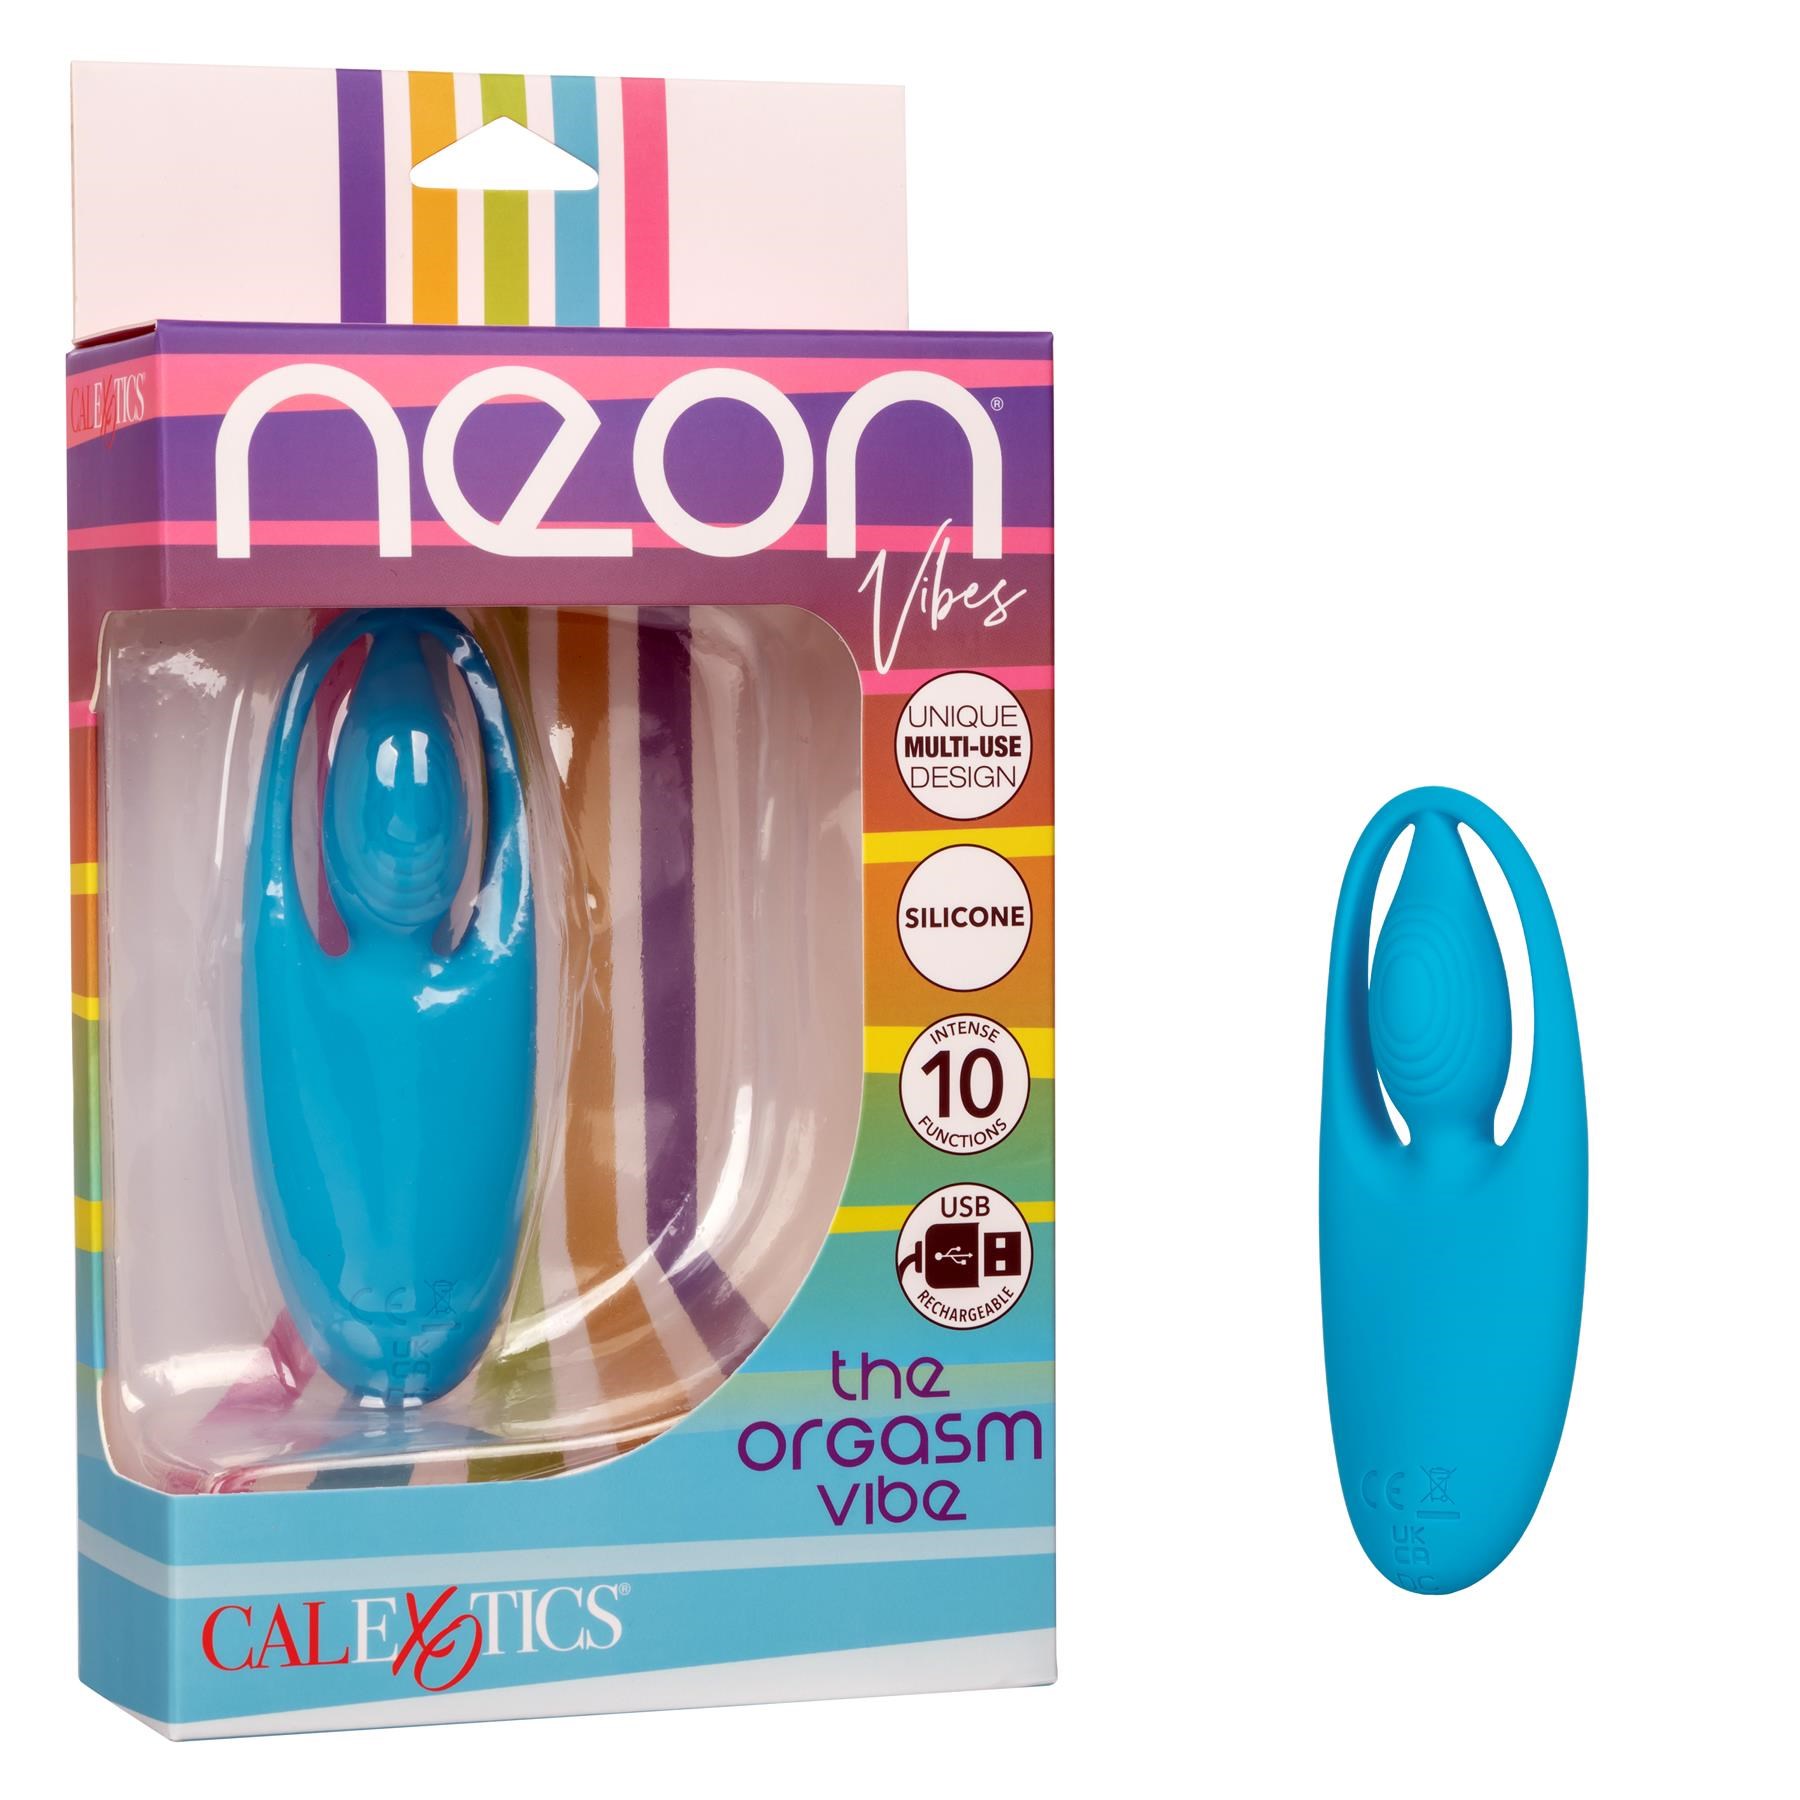 Neon The Orgasm Vibrator - Product and Packaging